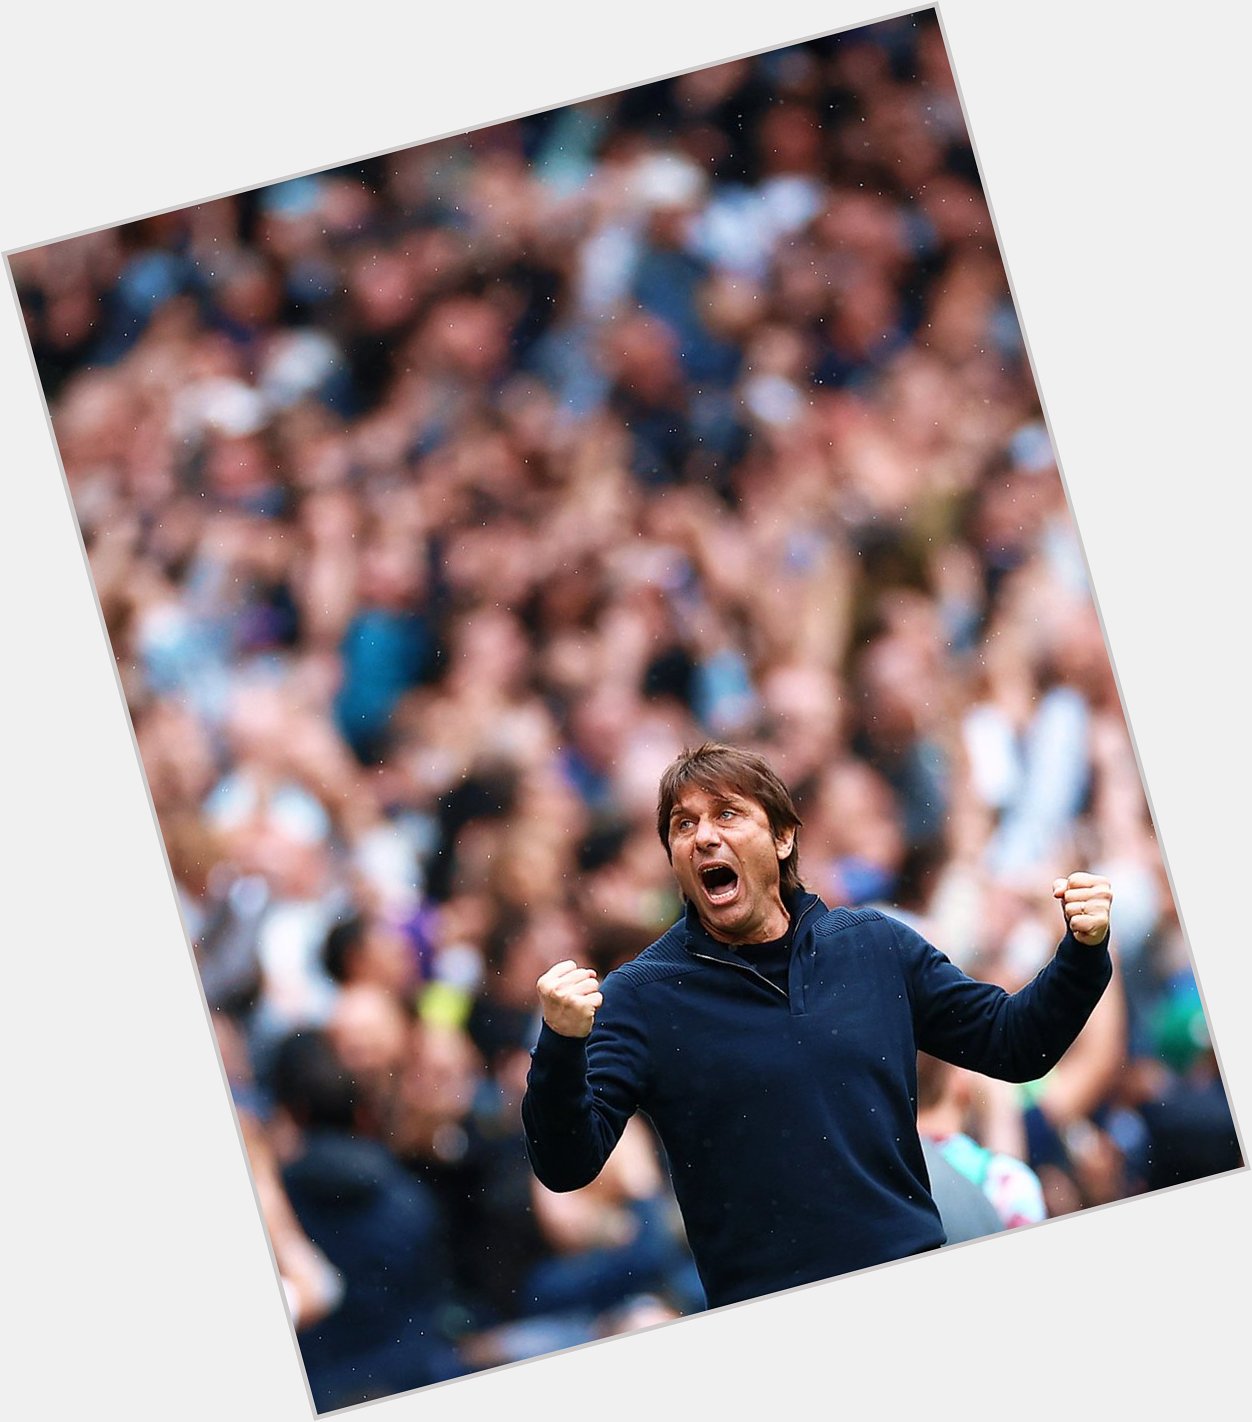 Happy birthday to Antonio Conte. The man that has passion for his work. 